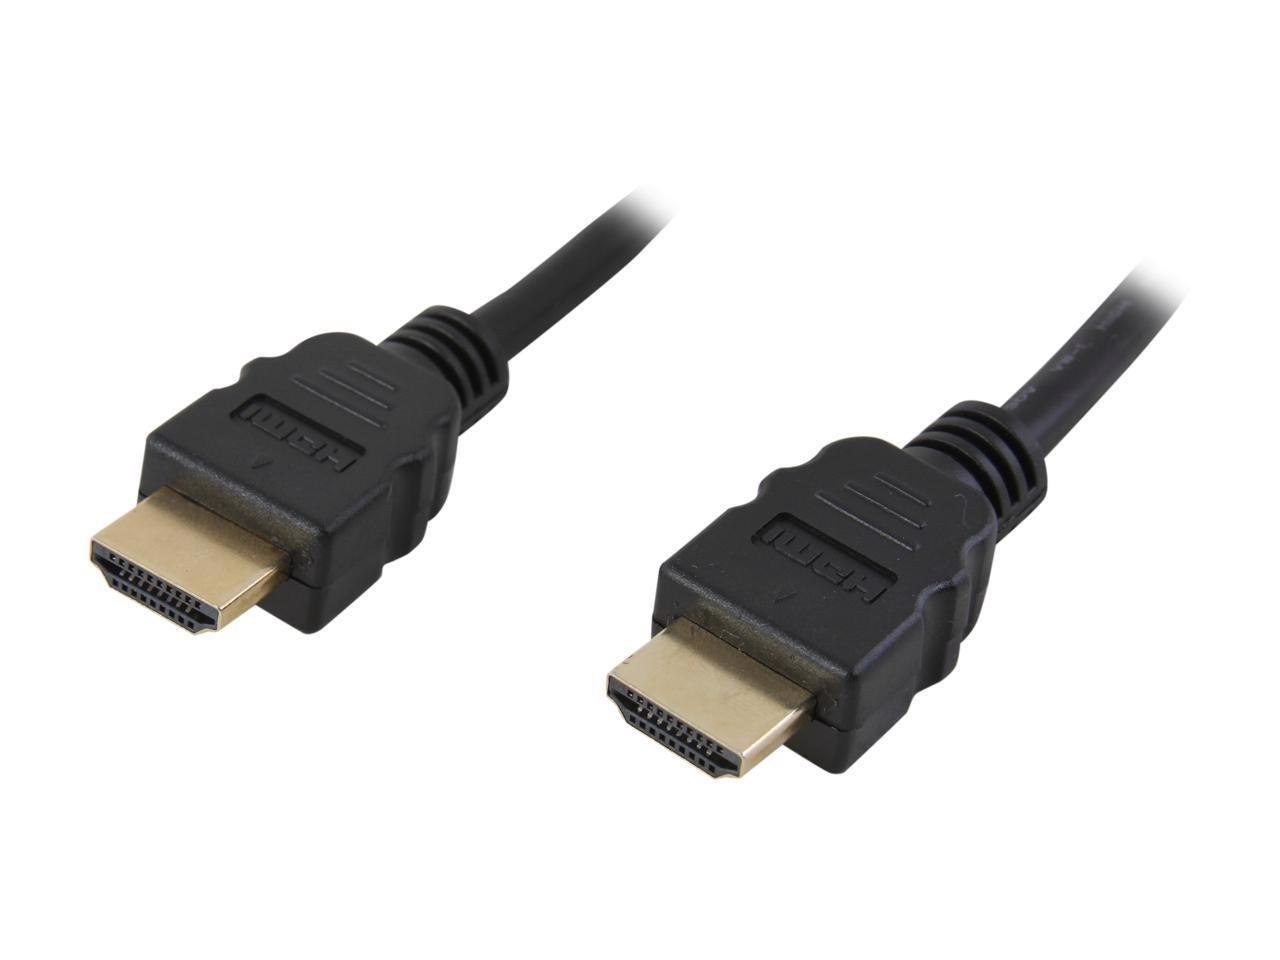 Nippon Labs Hdmi-Hs-6 6 FT. Hdmi 2.0 Male To Male High Speed Cable With Ethernet Channel